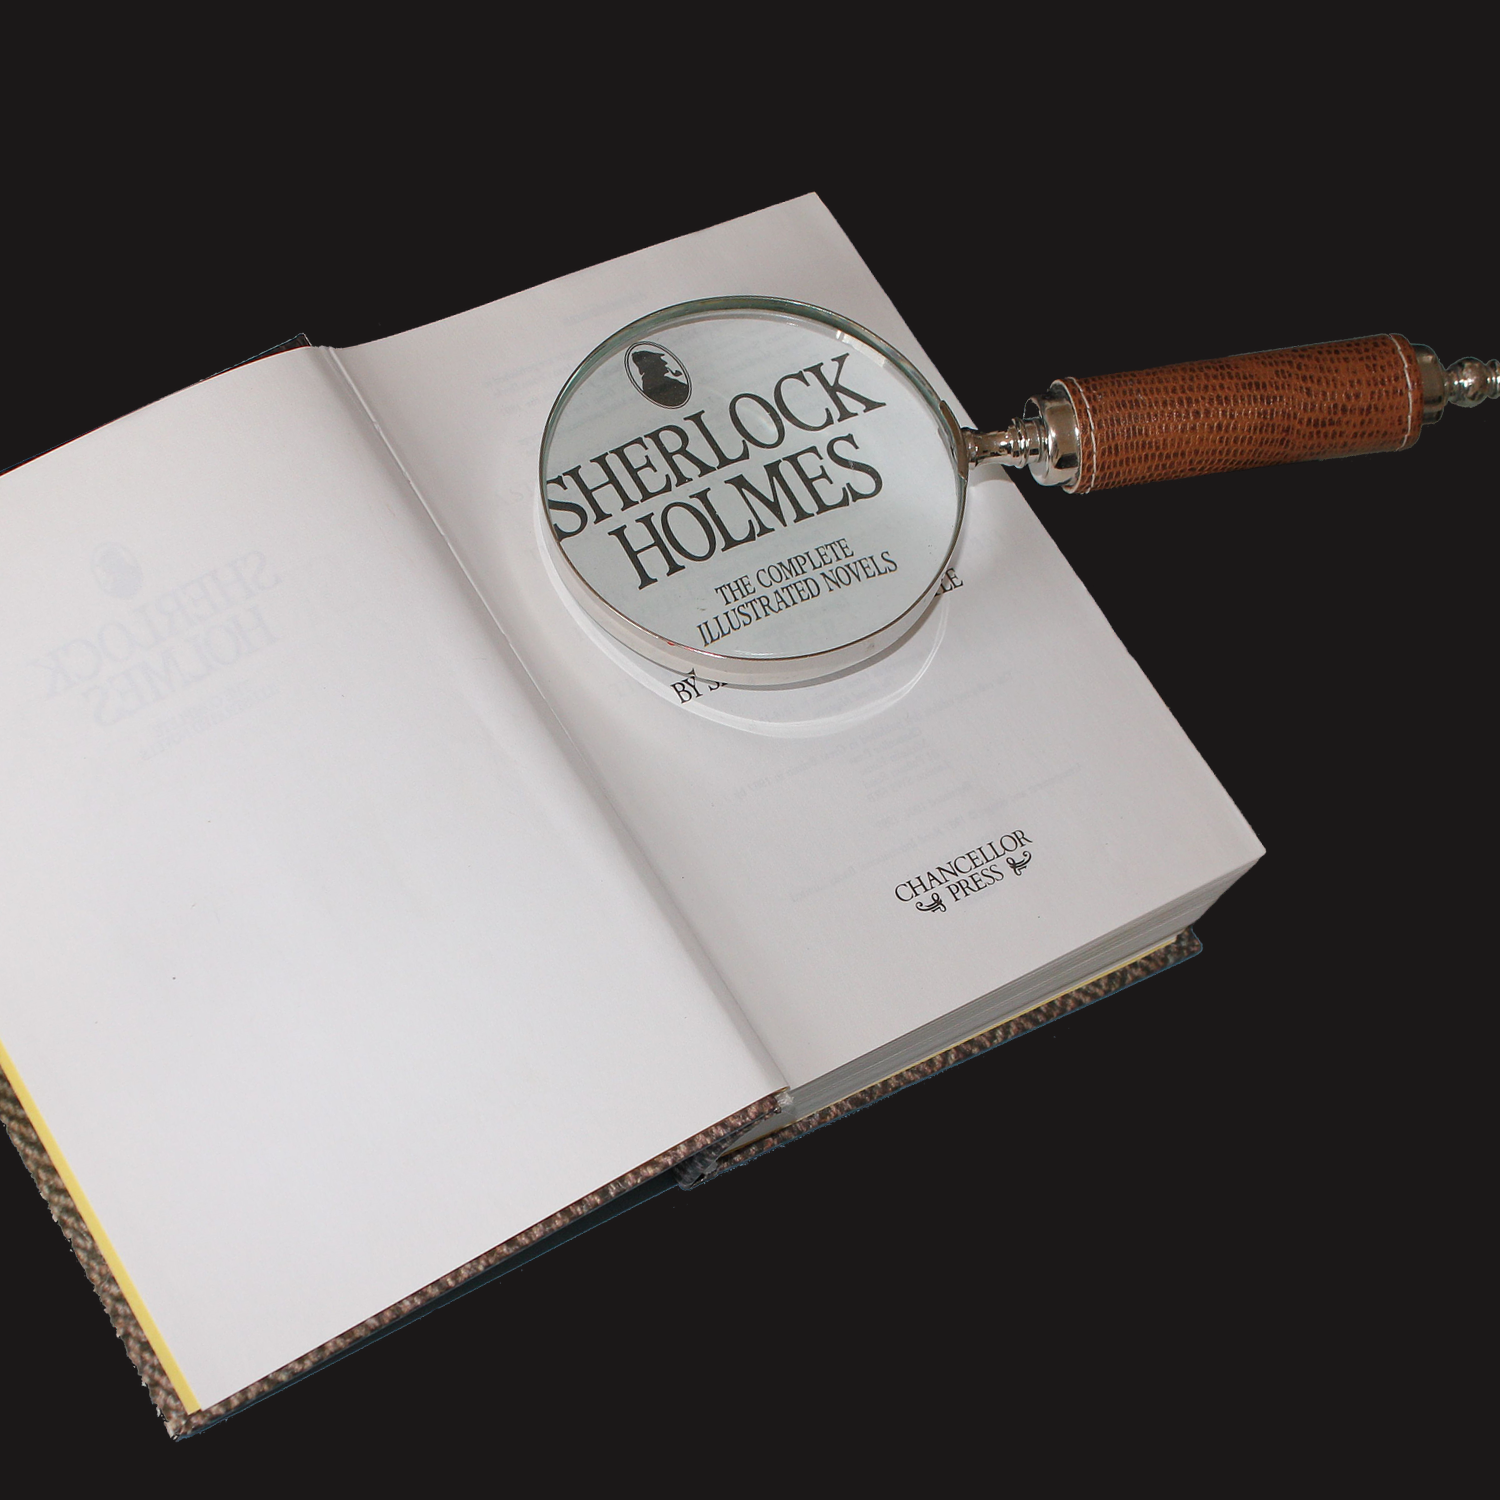 Sherlock Holmes book open with magnifying glass on it